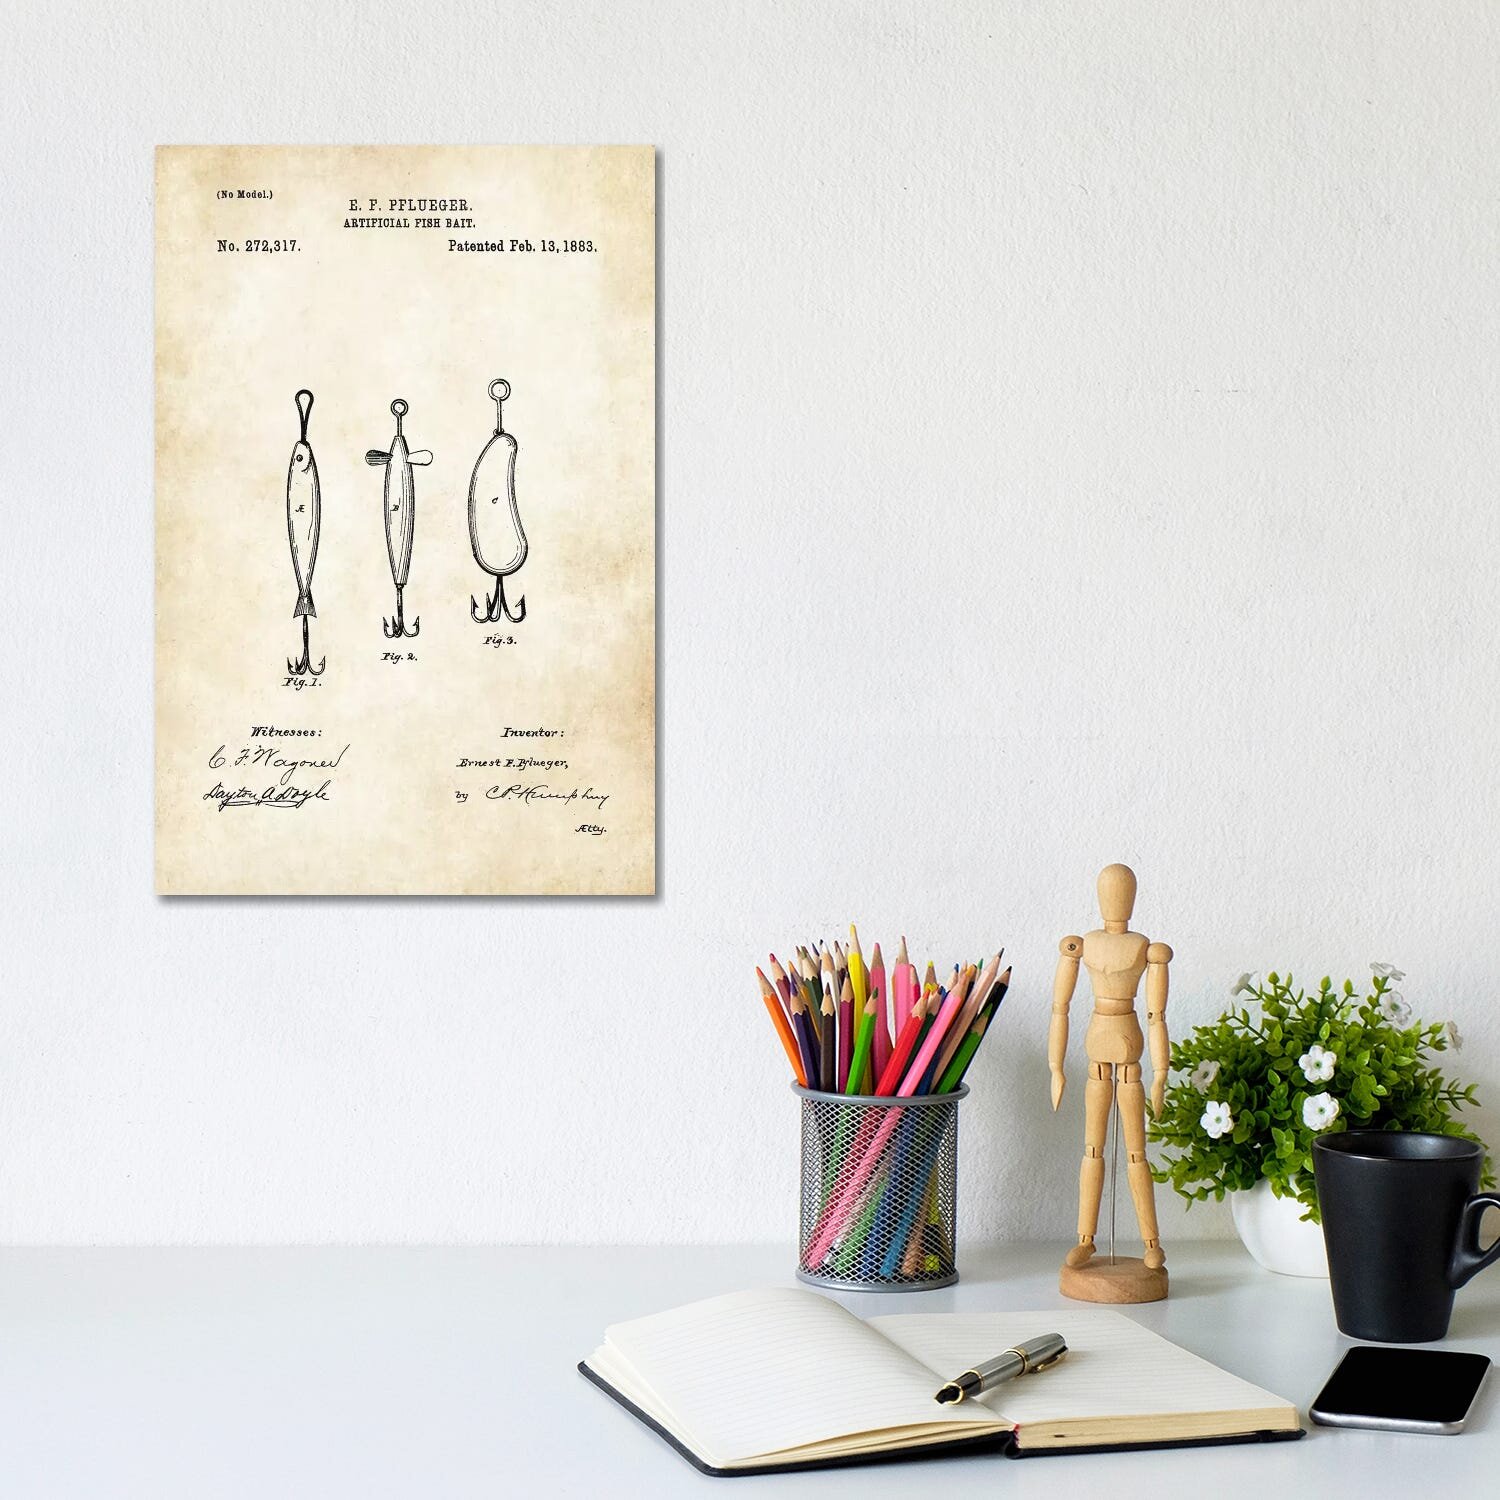 Bless international Antique Fishing Lure On Canvas by Patent77 Print